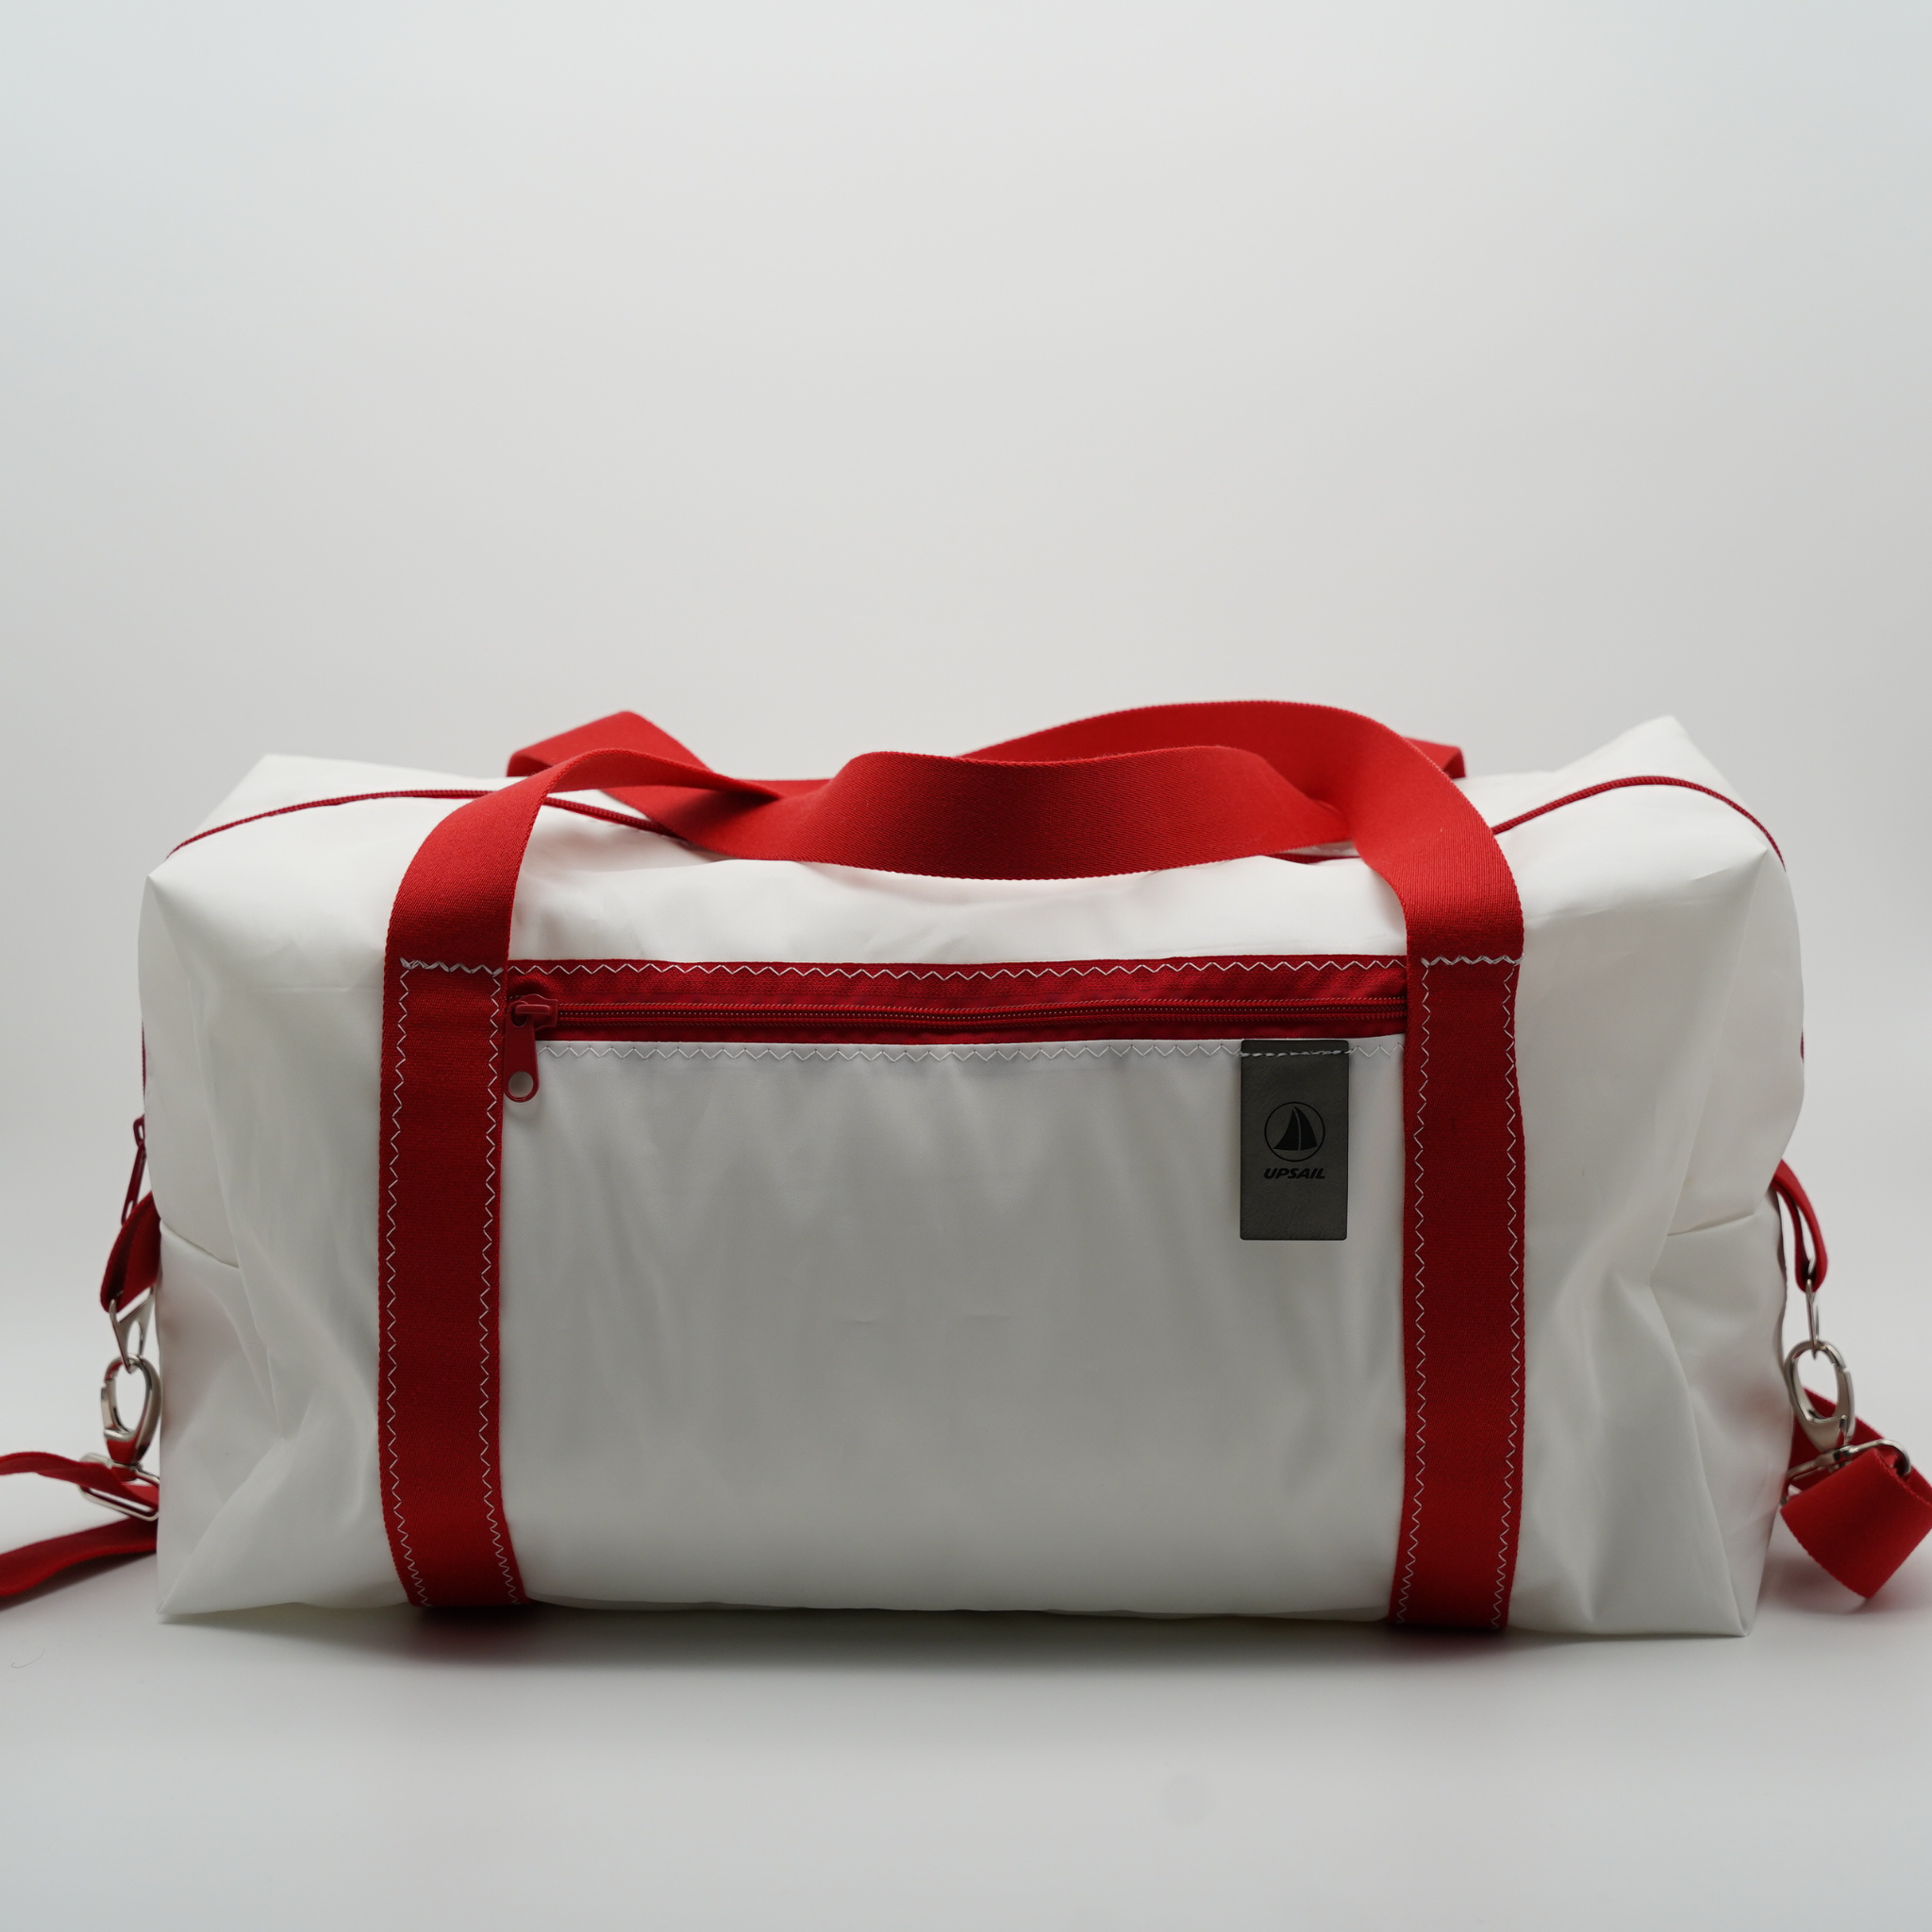 UpSail - Tasche Classic Extra Large Rot